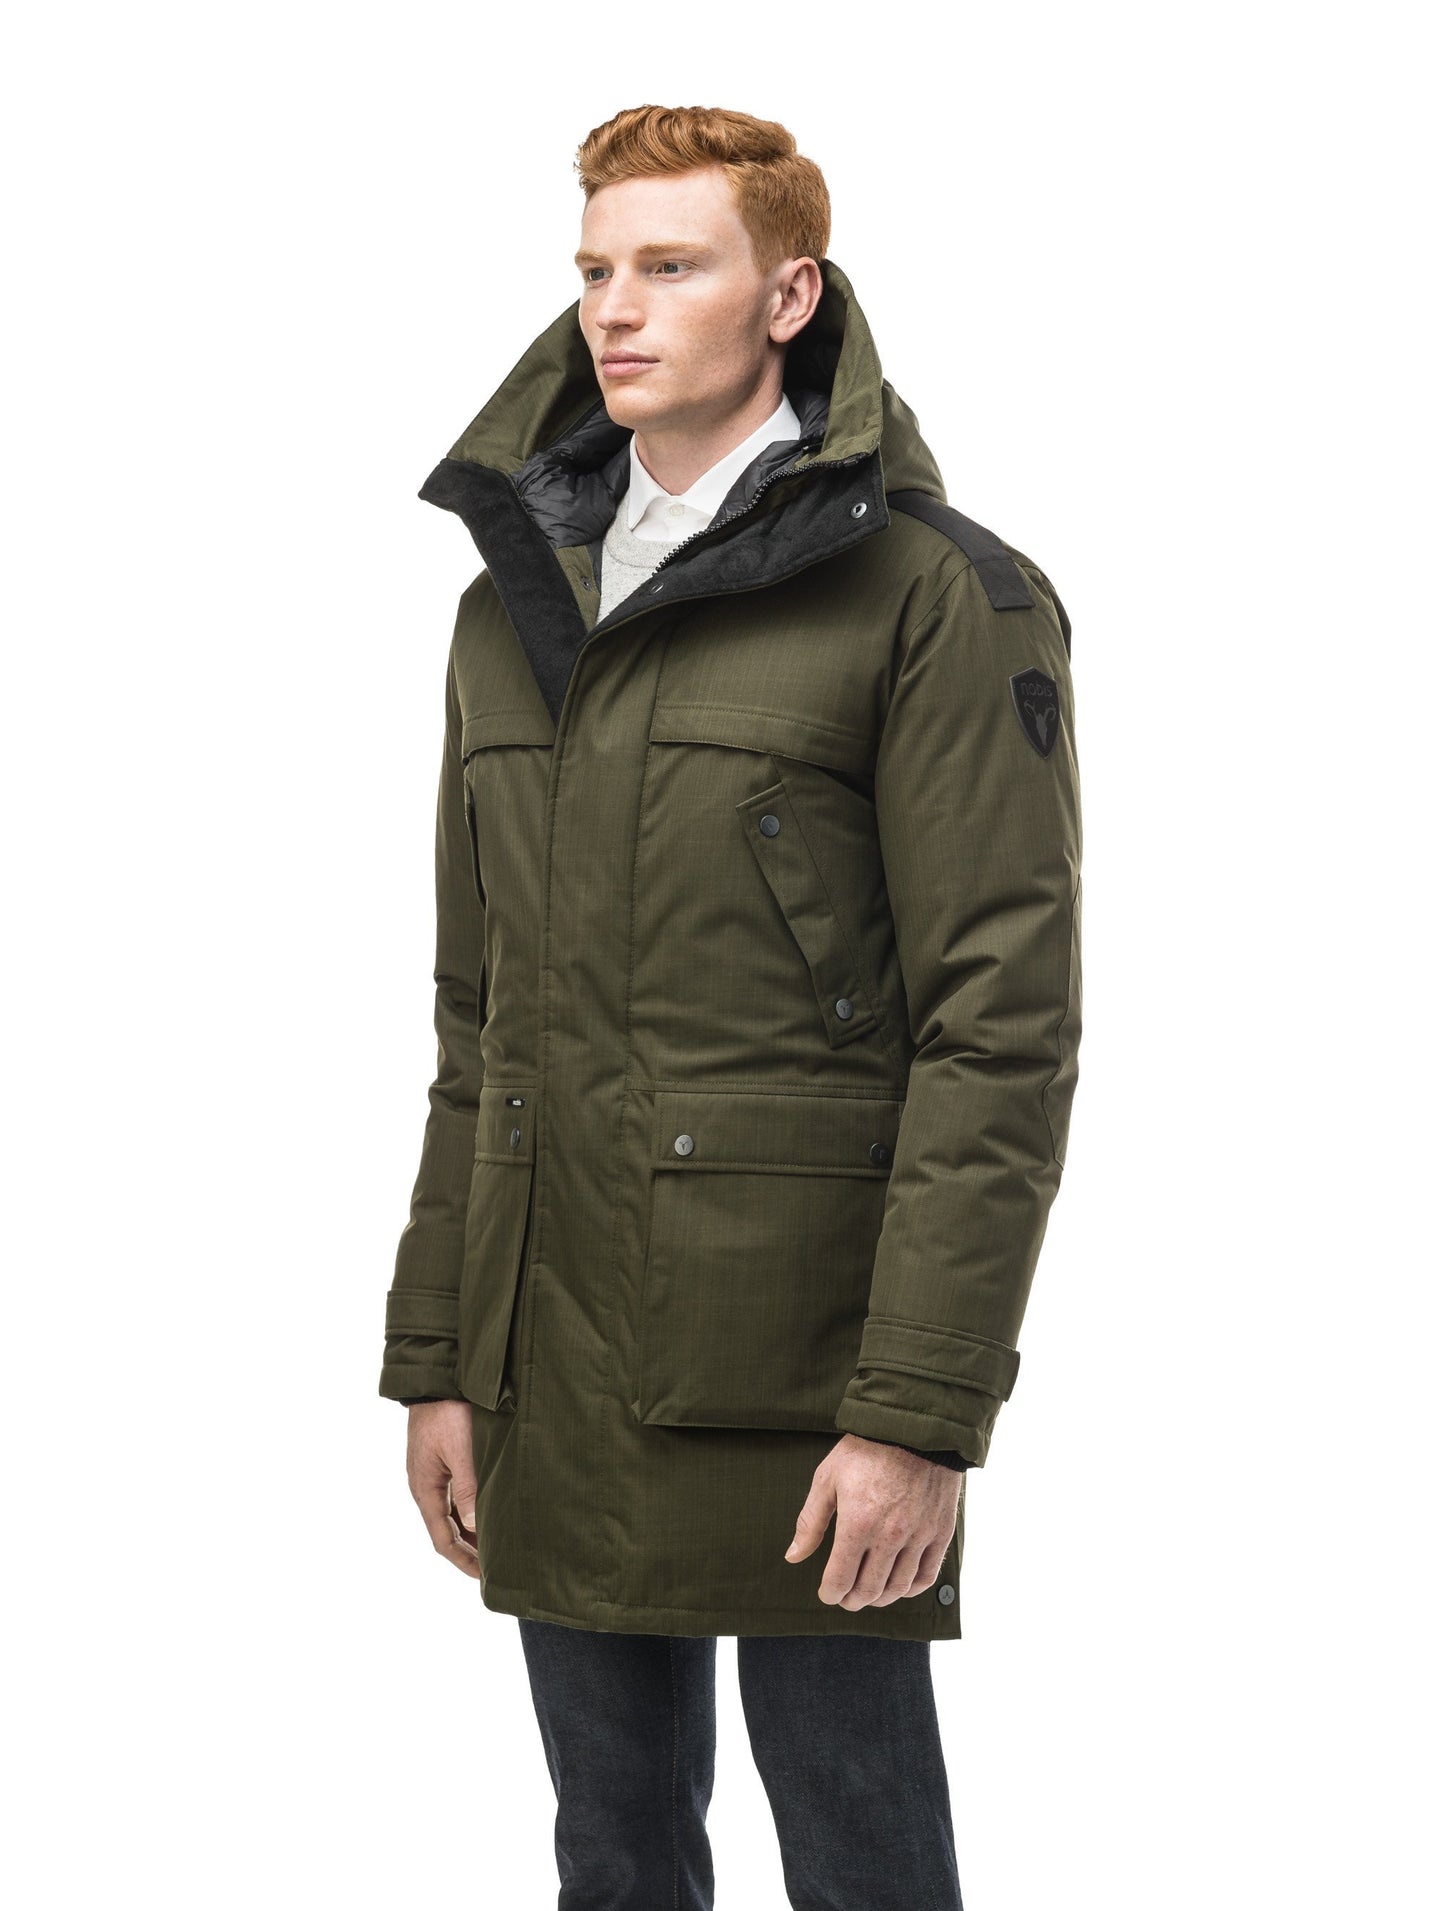 Men's Best Selling Parka the Yatesy is a down filled jacket with a zipper closure and magnetic placket in CH Fatigue